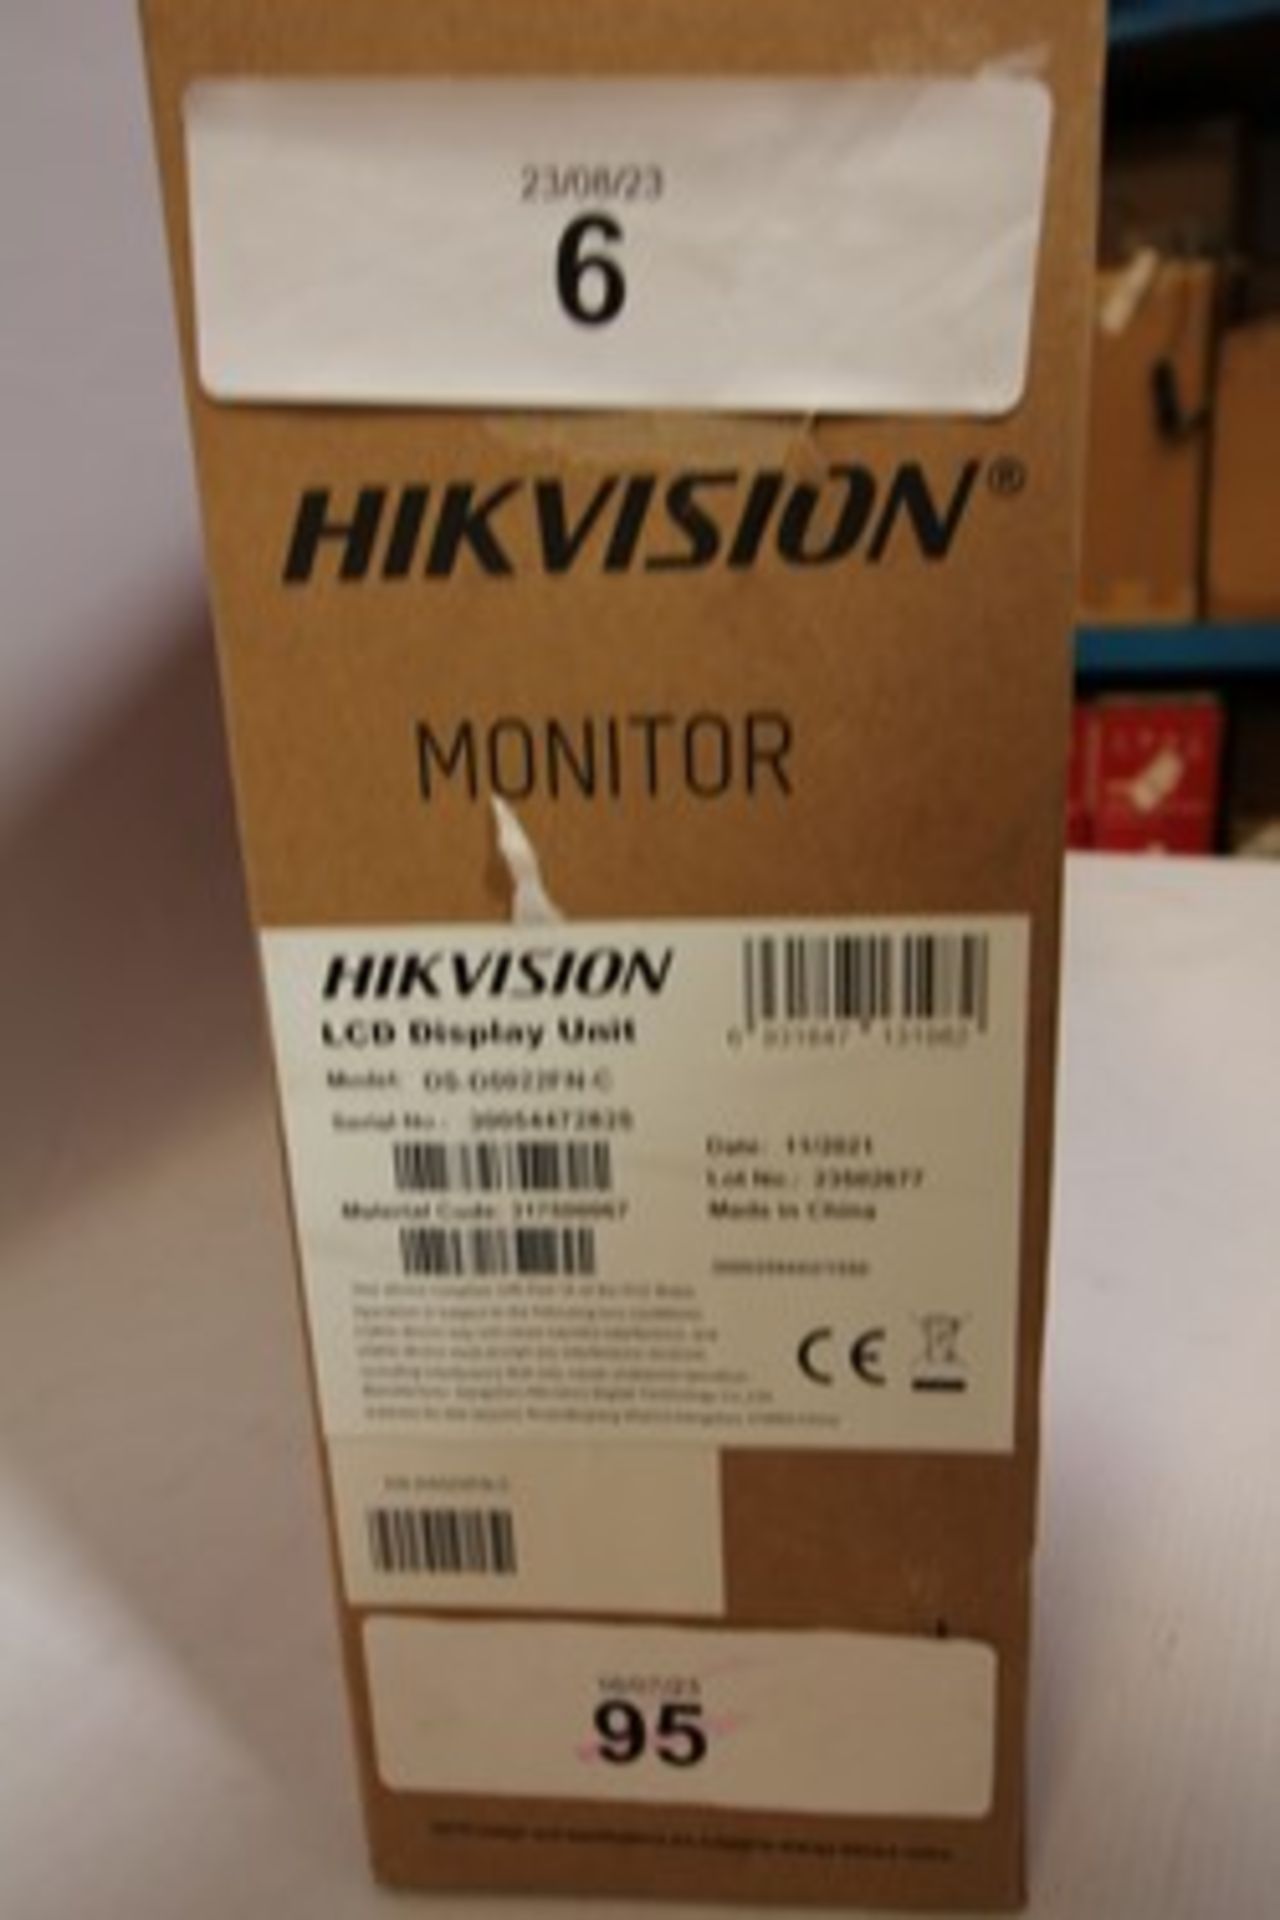 1 x Hikvision CCTC monitor, Model DS-D5022FN-C - Sealed new in box (GS1) - Image 2 of 5